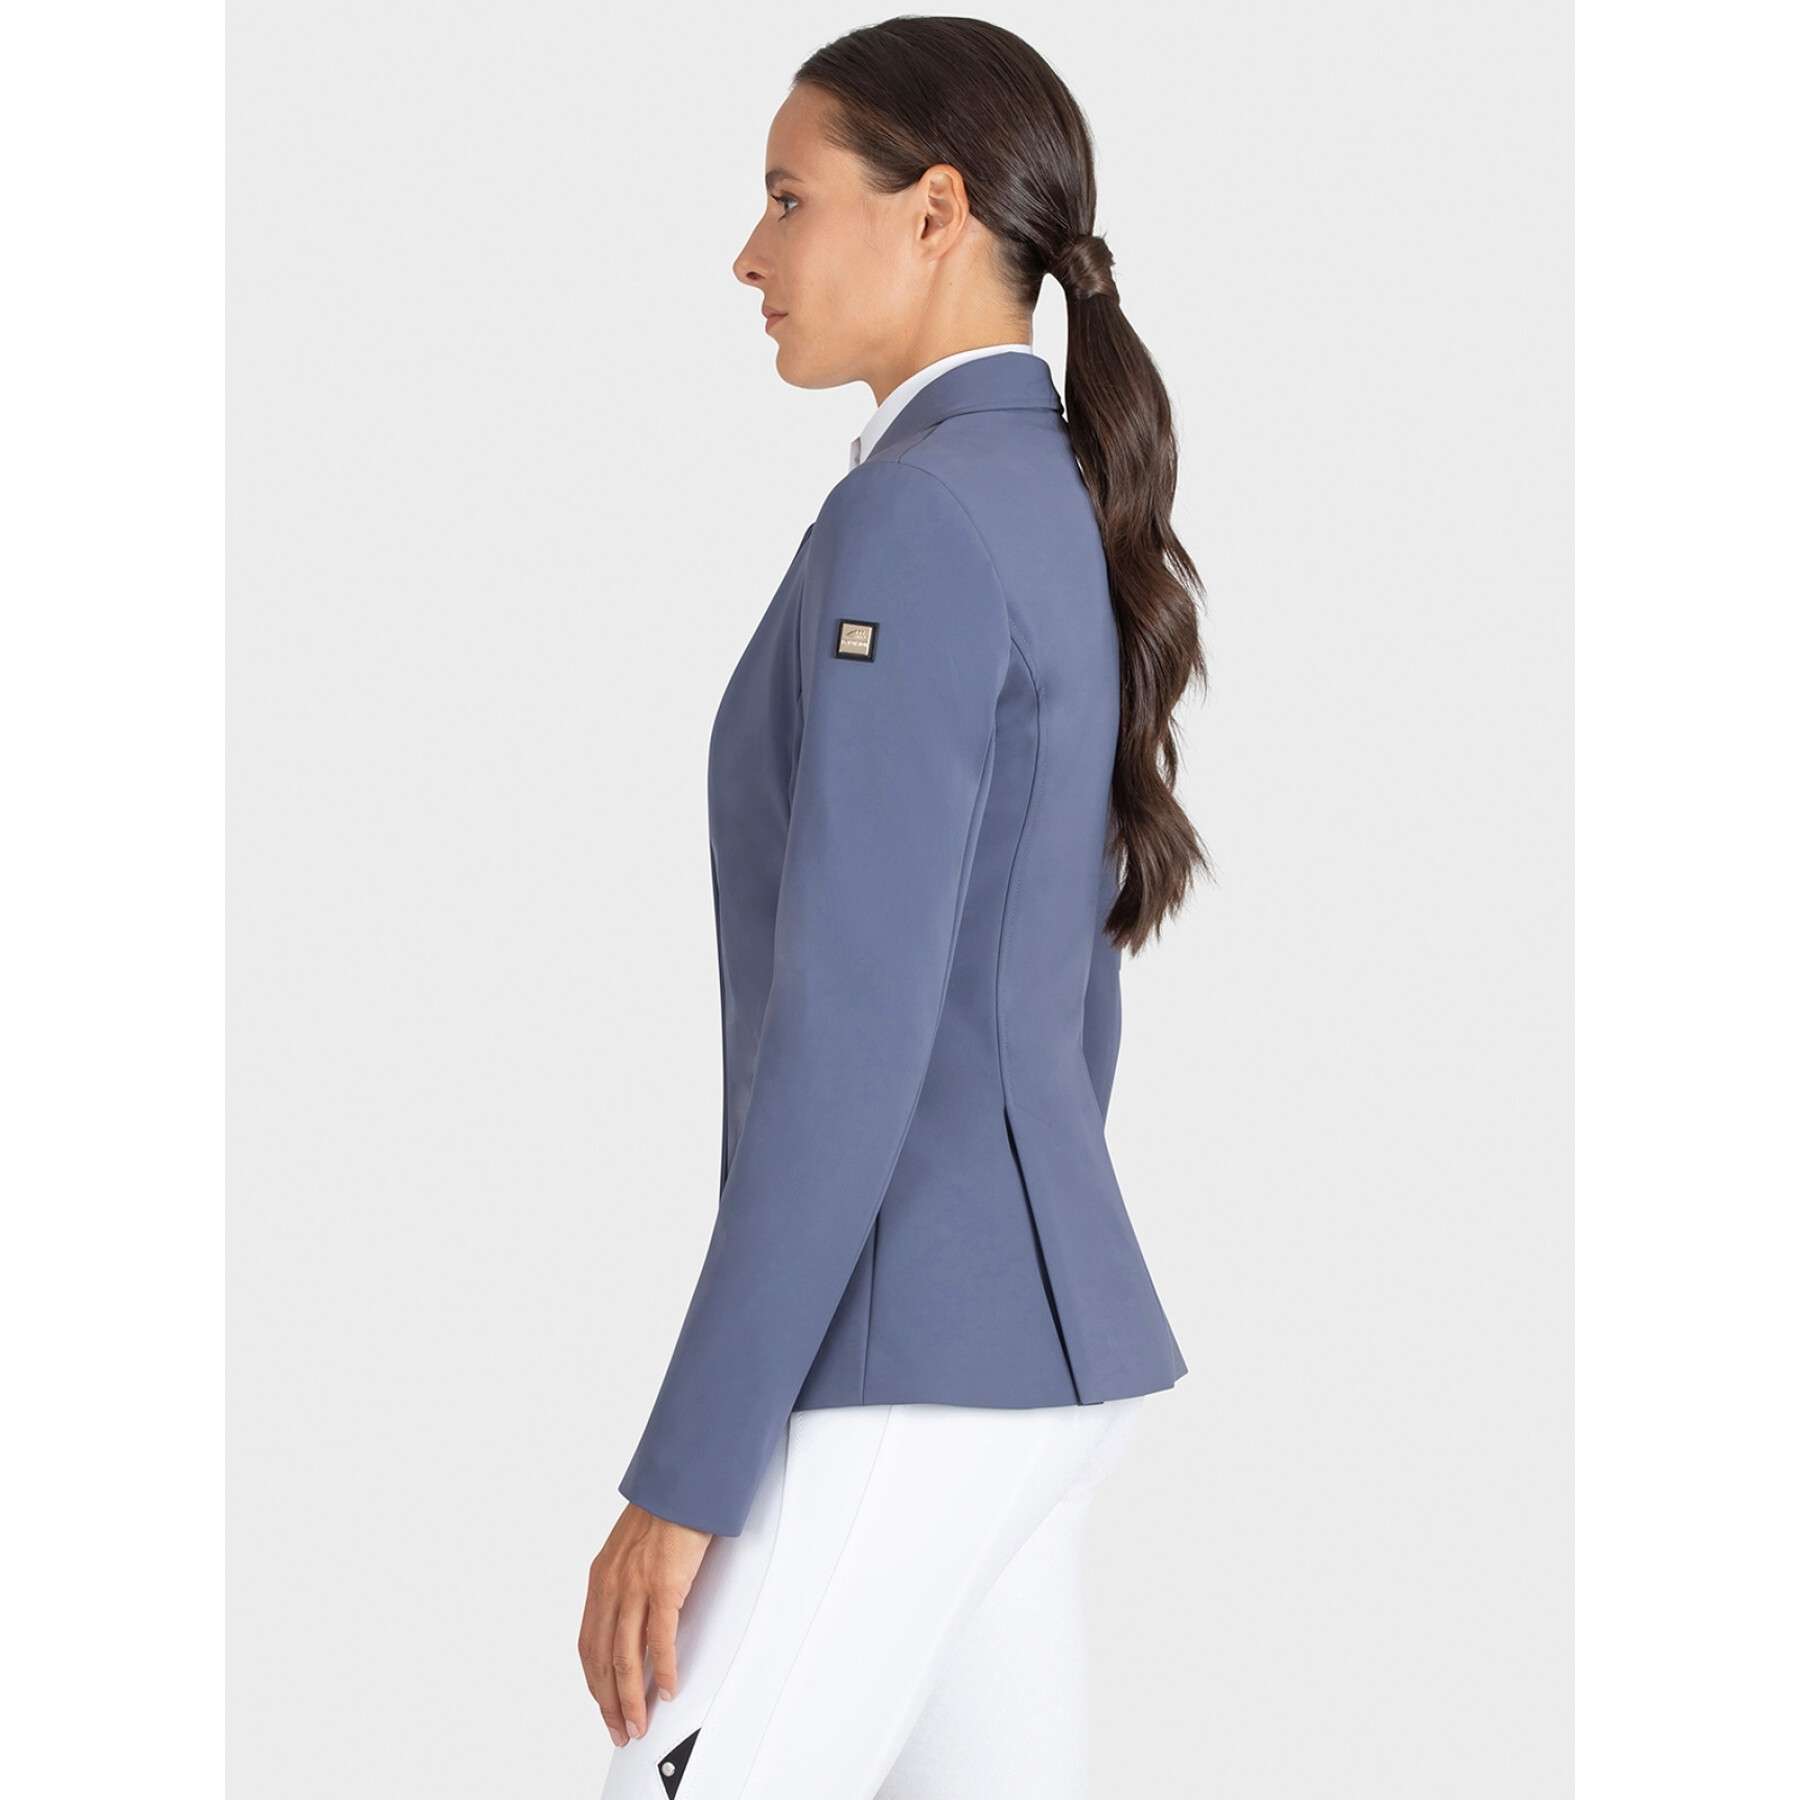 Riding jacket for women Equiline Elorne